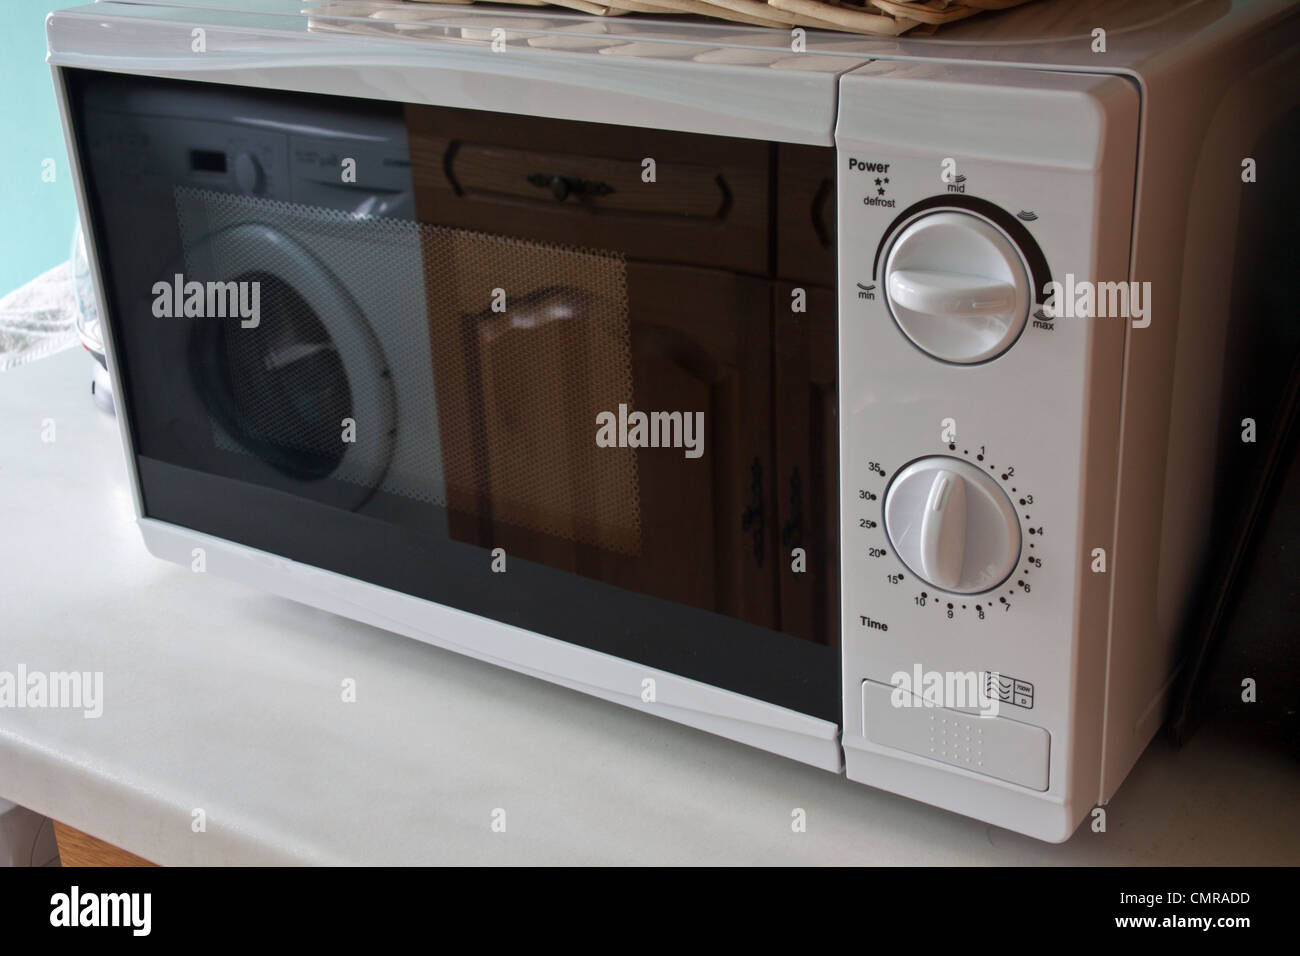 700w microwave oven. Stock Photo